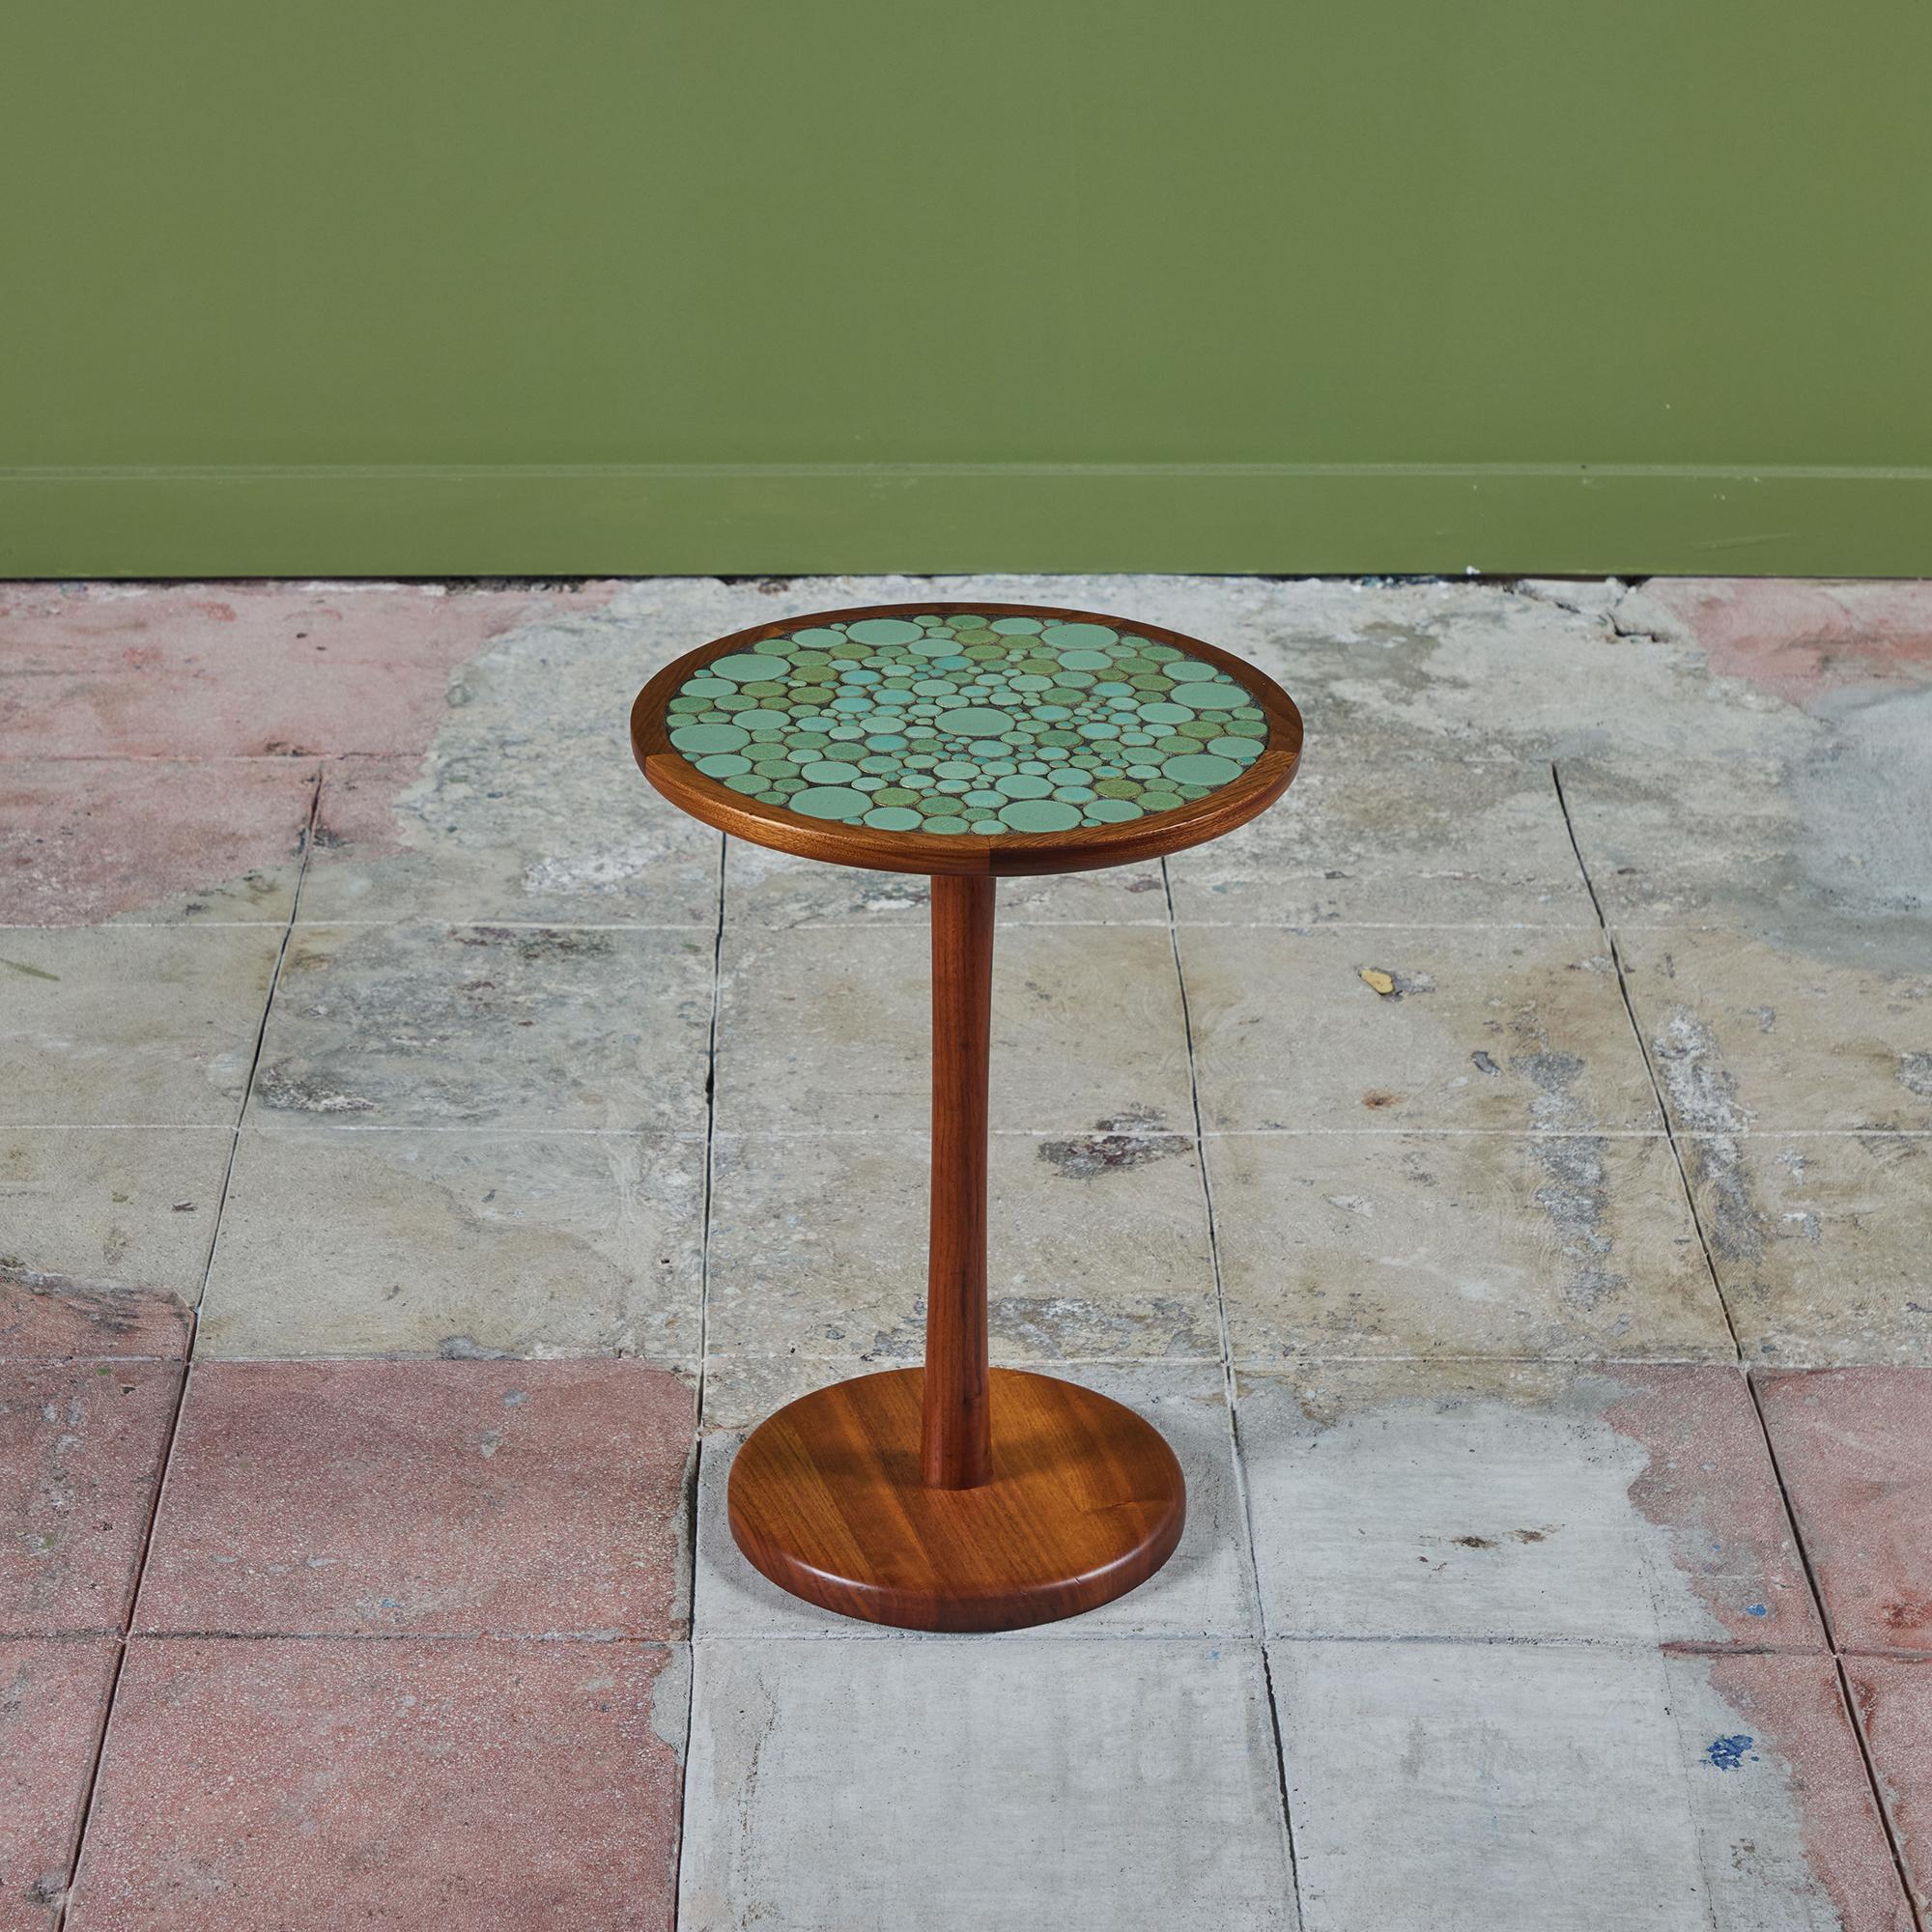 Round side table by Gordon & Jane Martz. The table top is inlaid with ceramic coin tiles in a sea foam green matte glaze. The frame, base and pedestal of the table are all solid walnut.

Dimensions
14